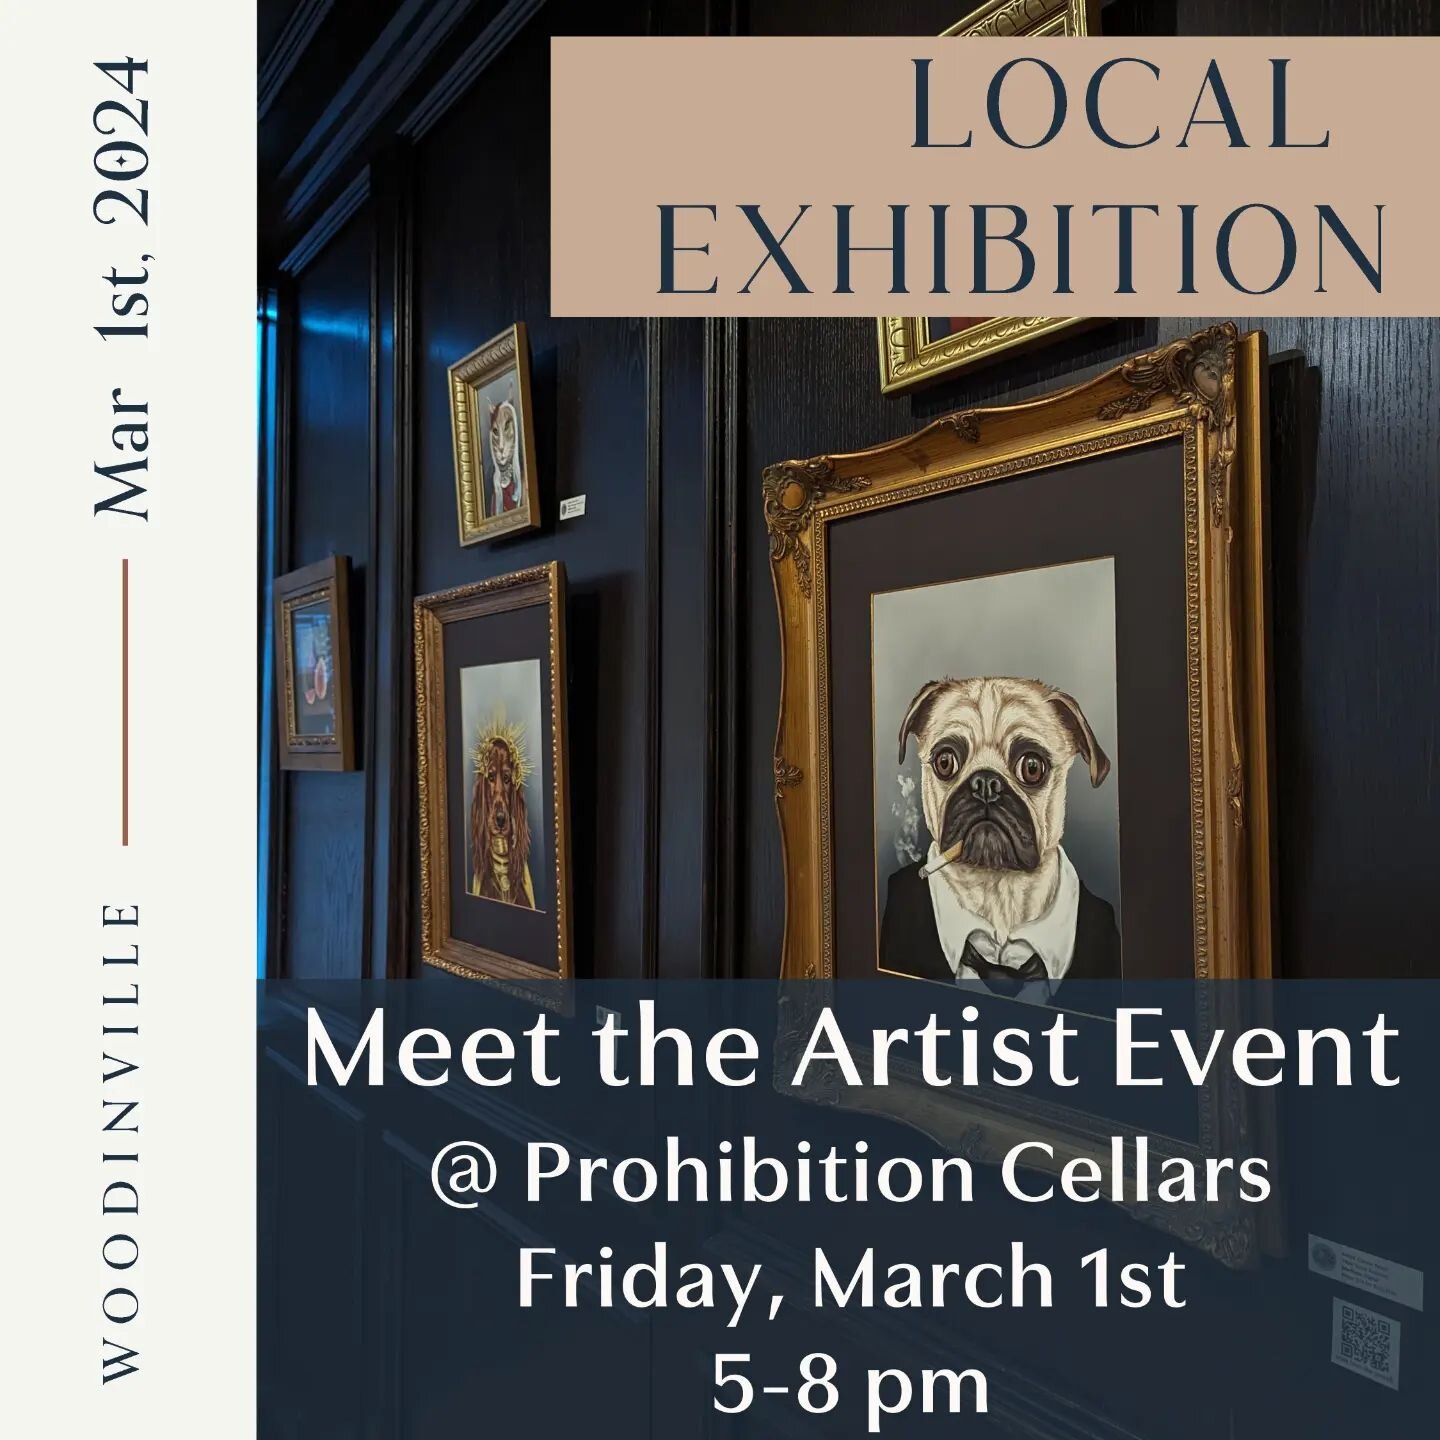 This Friday come join me at @prohibitioncellars for a spectacular Spring Art Walk organized by the @woodinvilleartsalliance. Come pop in to chat with yours truly and see all of my celebrity doppelgangers in their glory 😍 There will be some amazing l